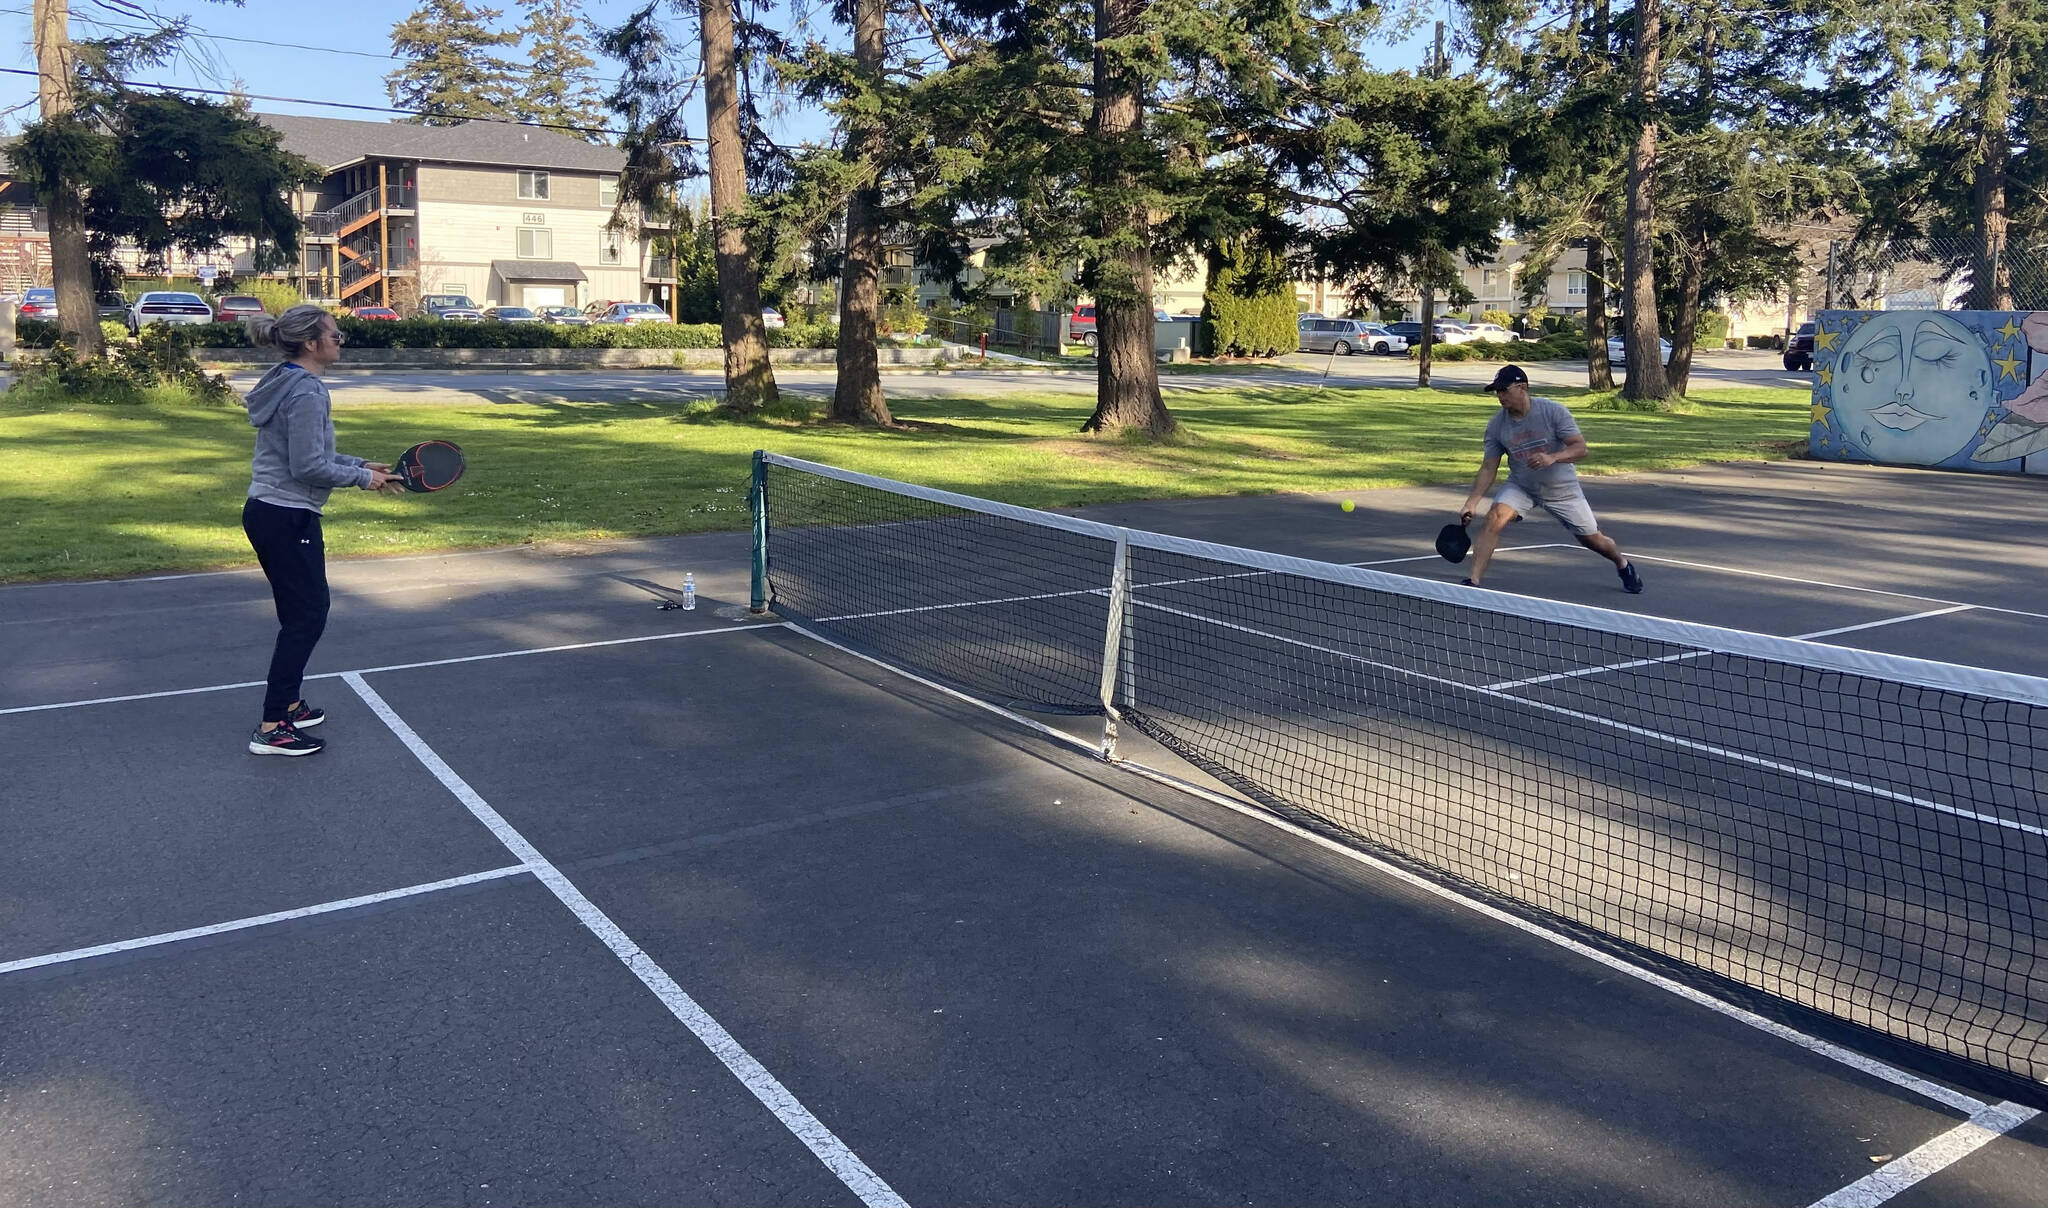 Photo by Rachel Rosen/Whidbey News-Times
Ronaldo and Stacey Nascimento play pickleball in Rotary Park.